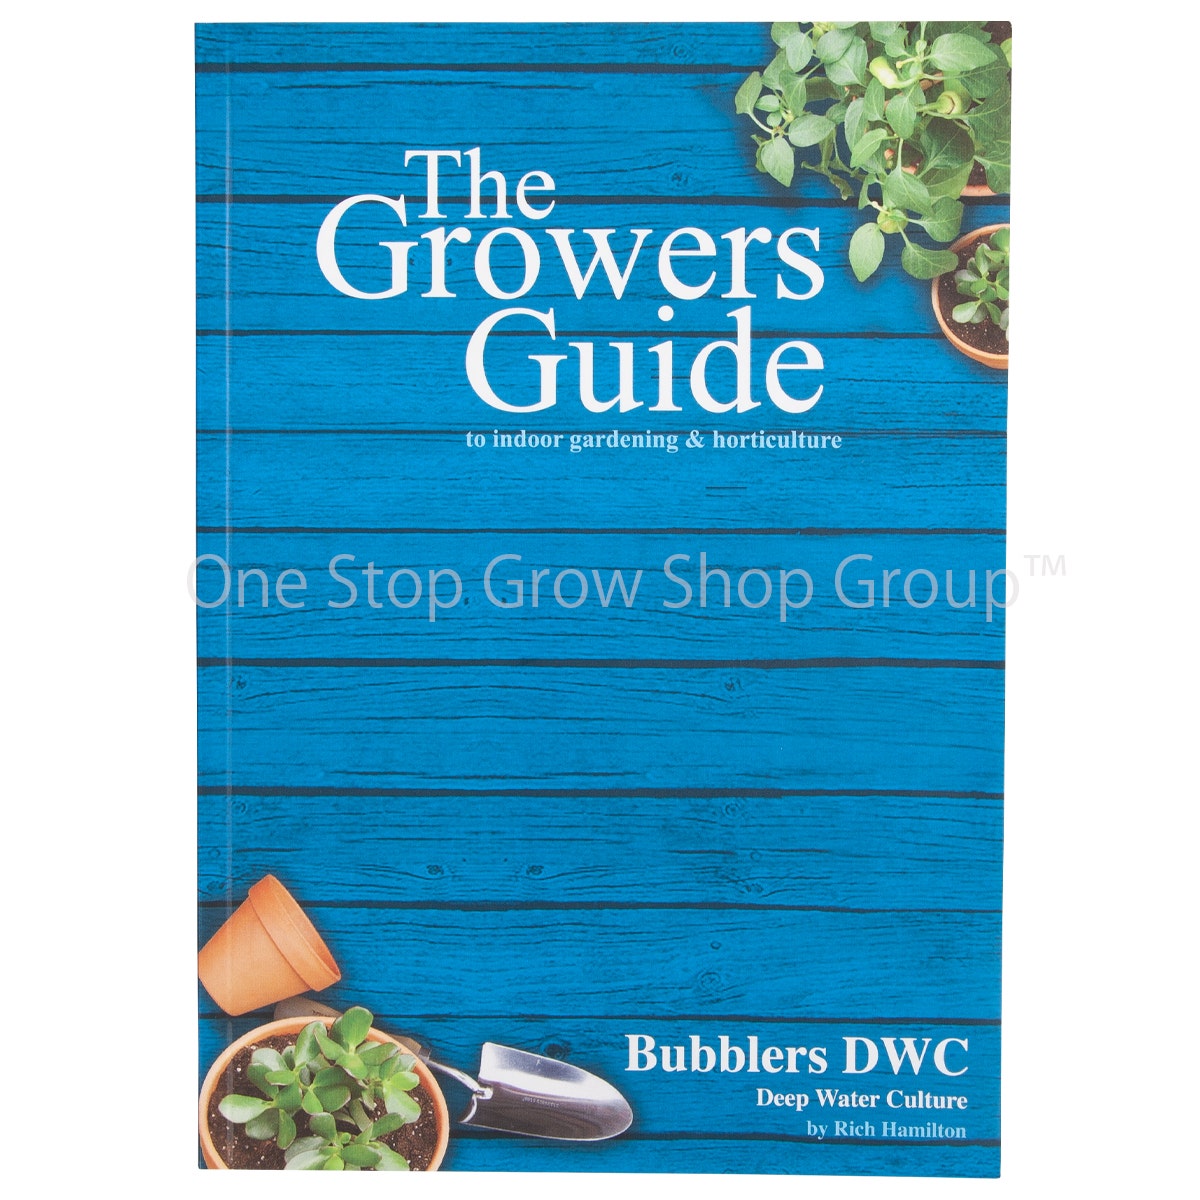 The Grower's Guide Book Series